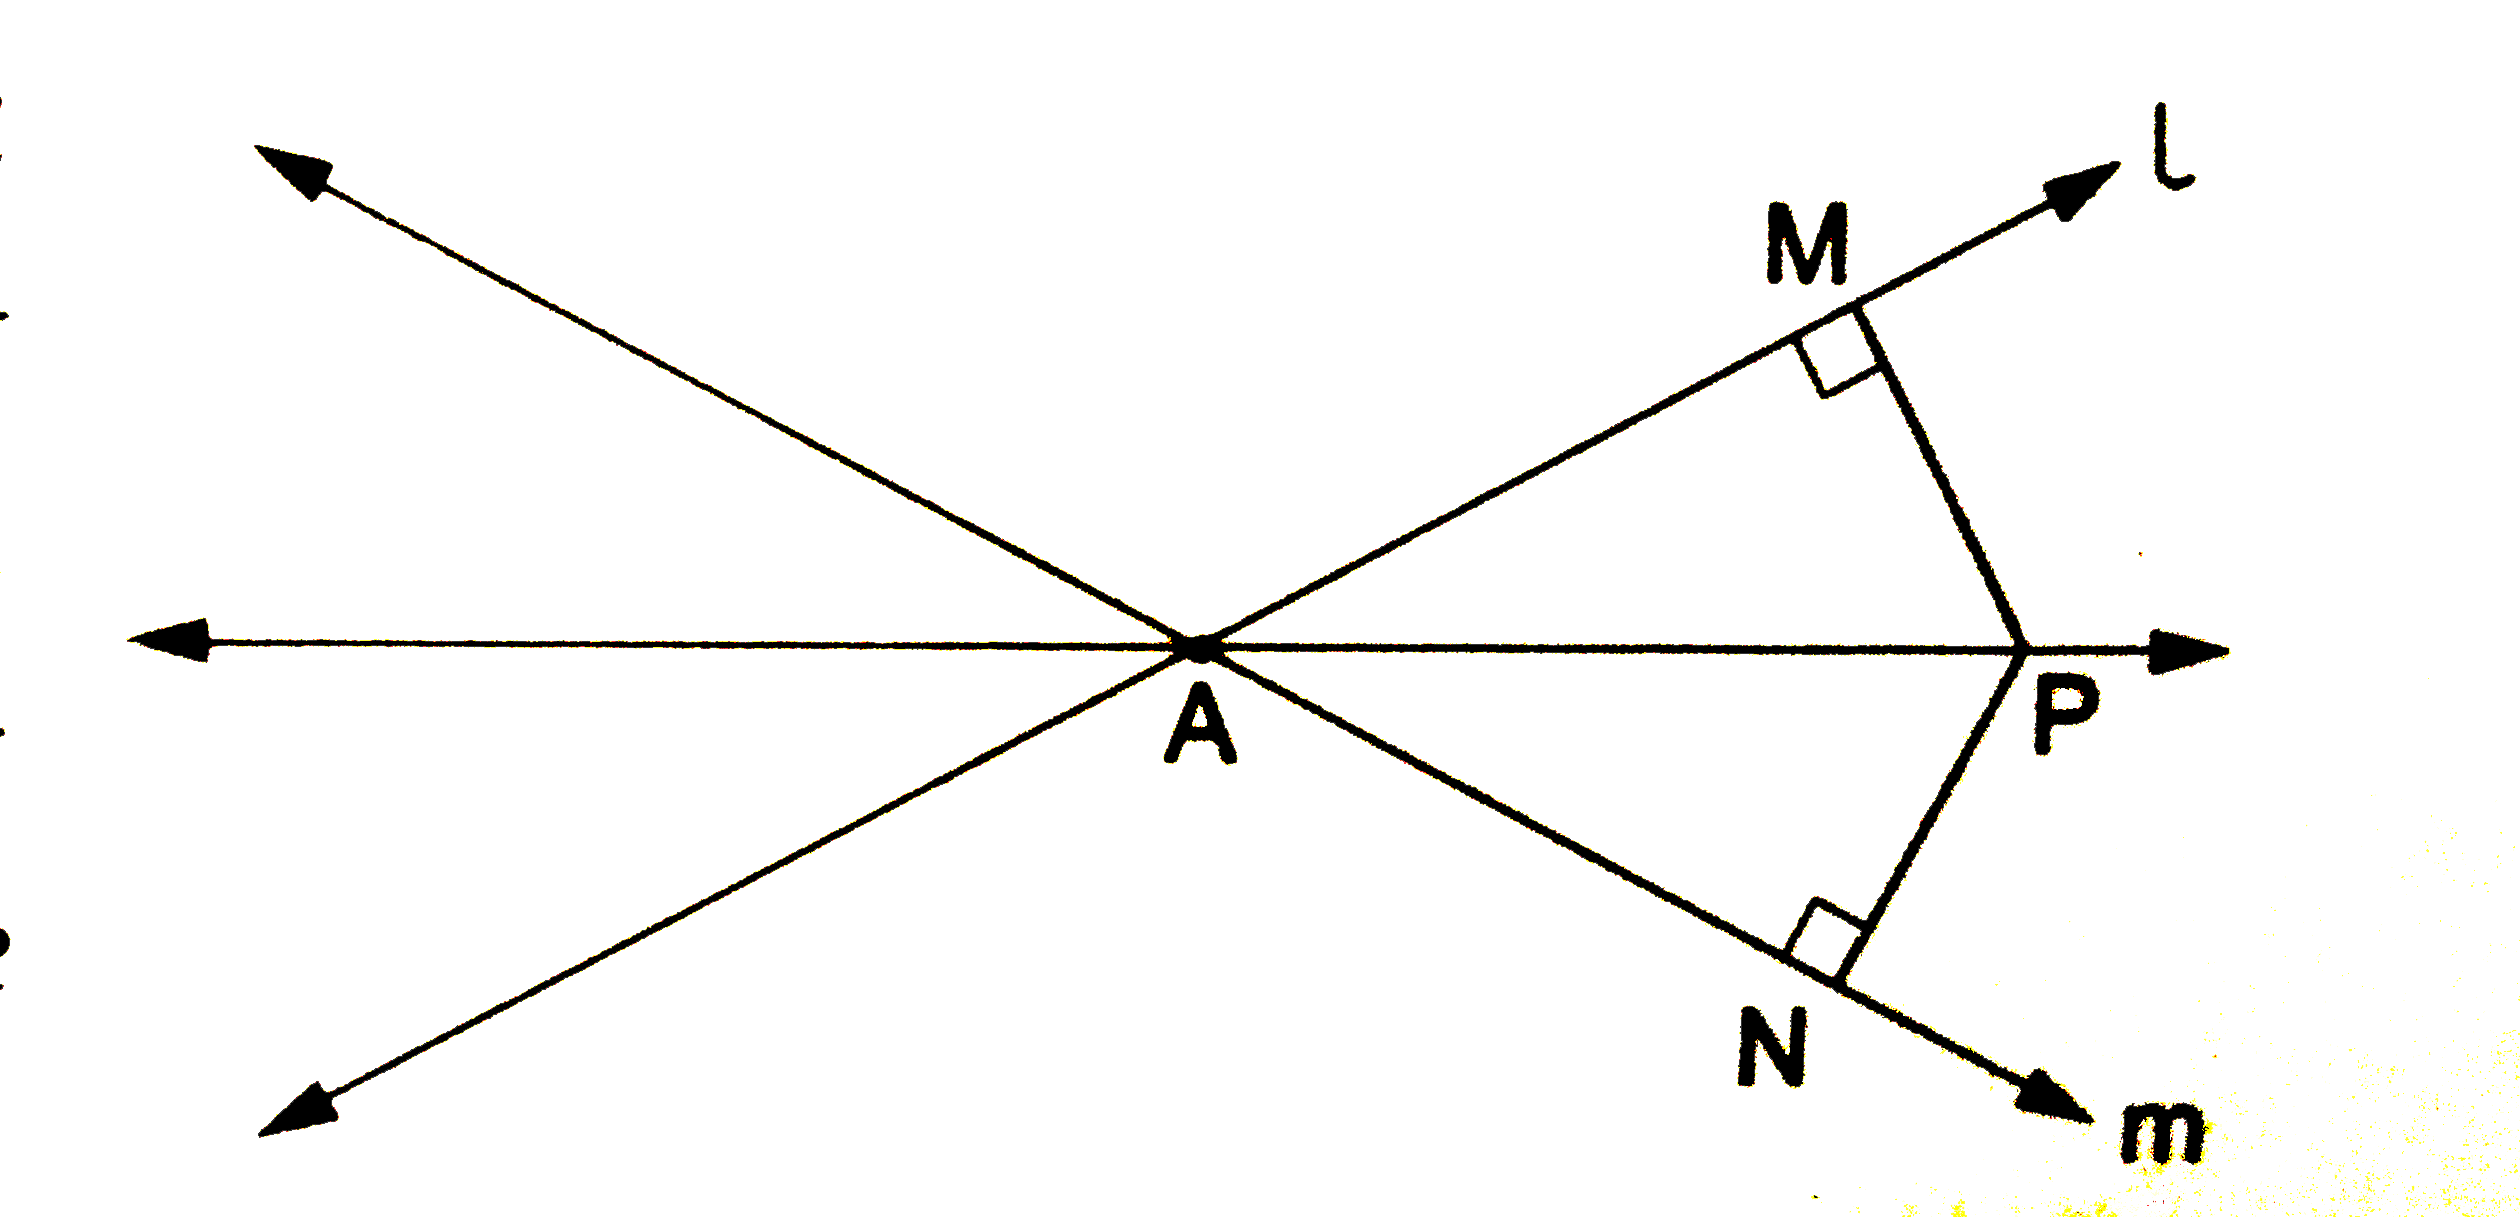 P is a point equidistant from two lines l and m intersecting at a point A, as shown in the given figure. Show that the line AP bisects tha angle between them.